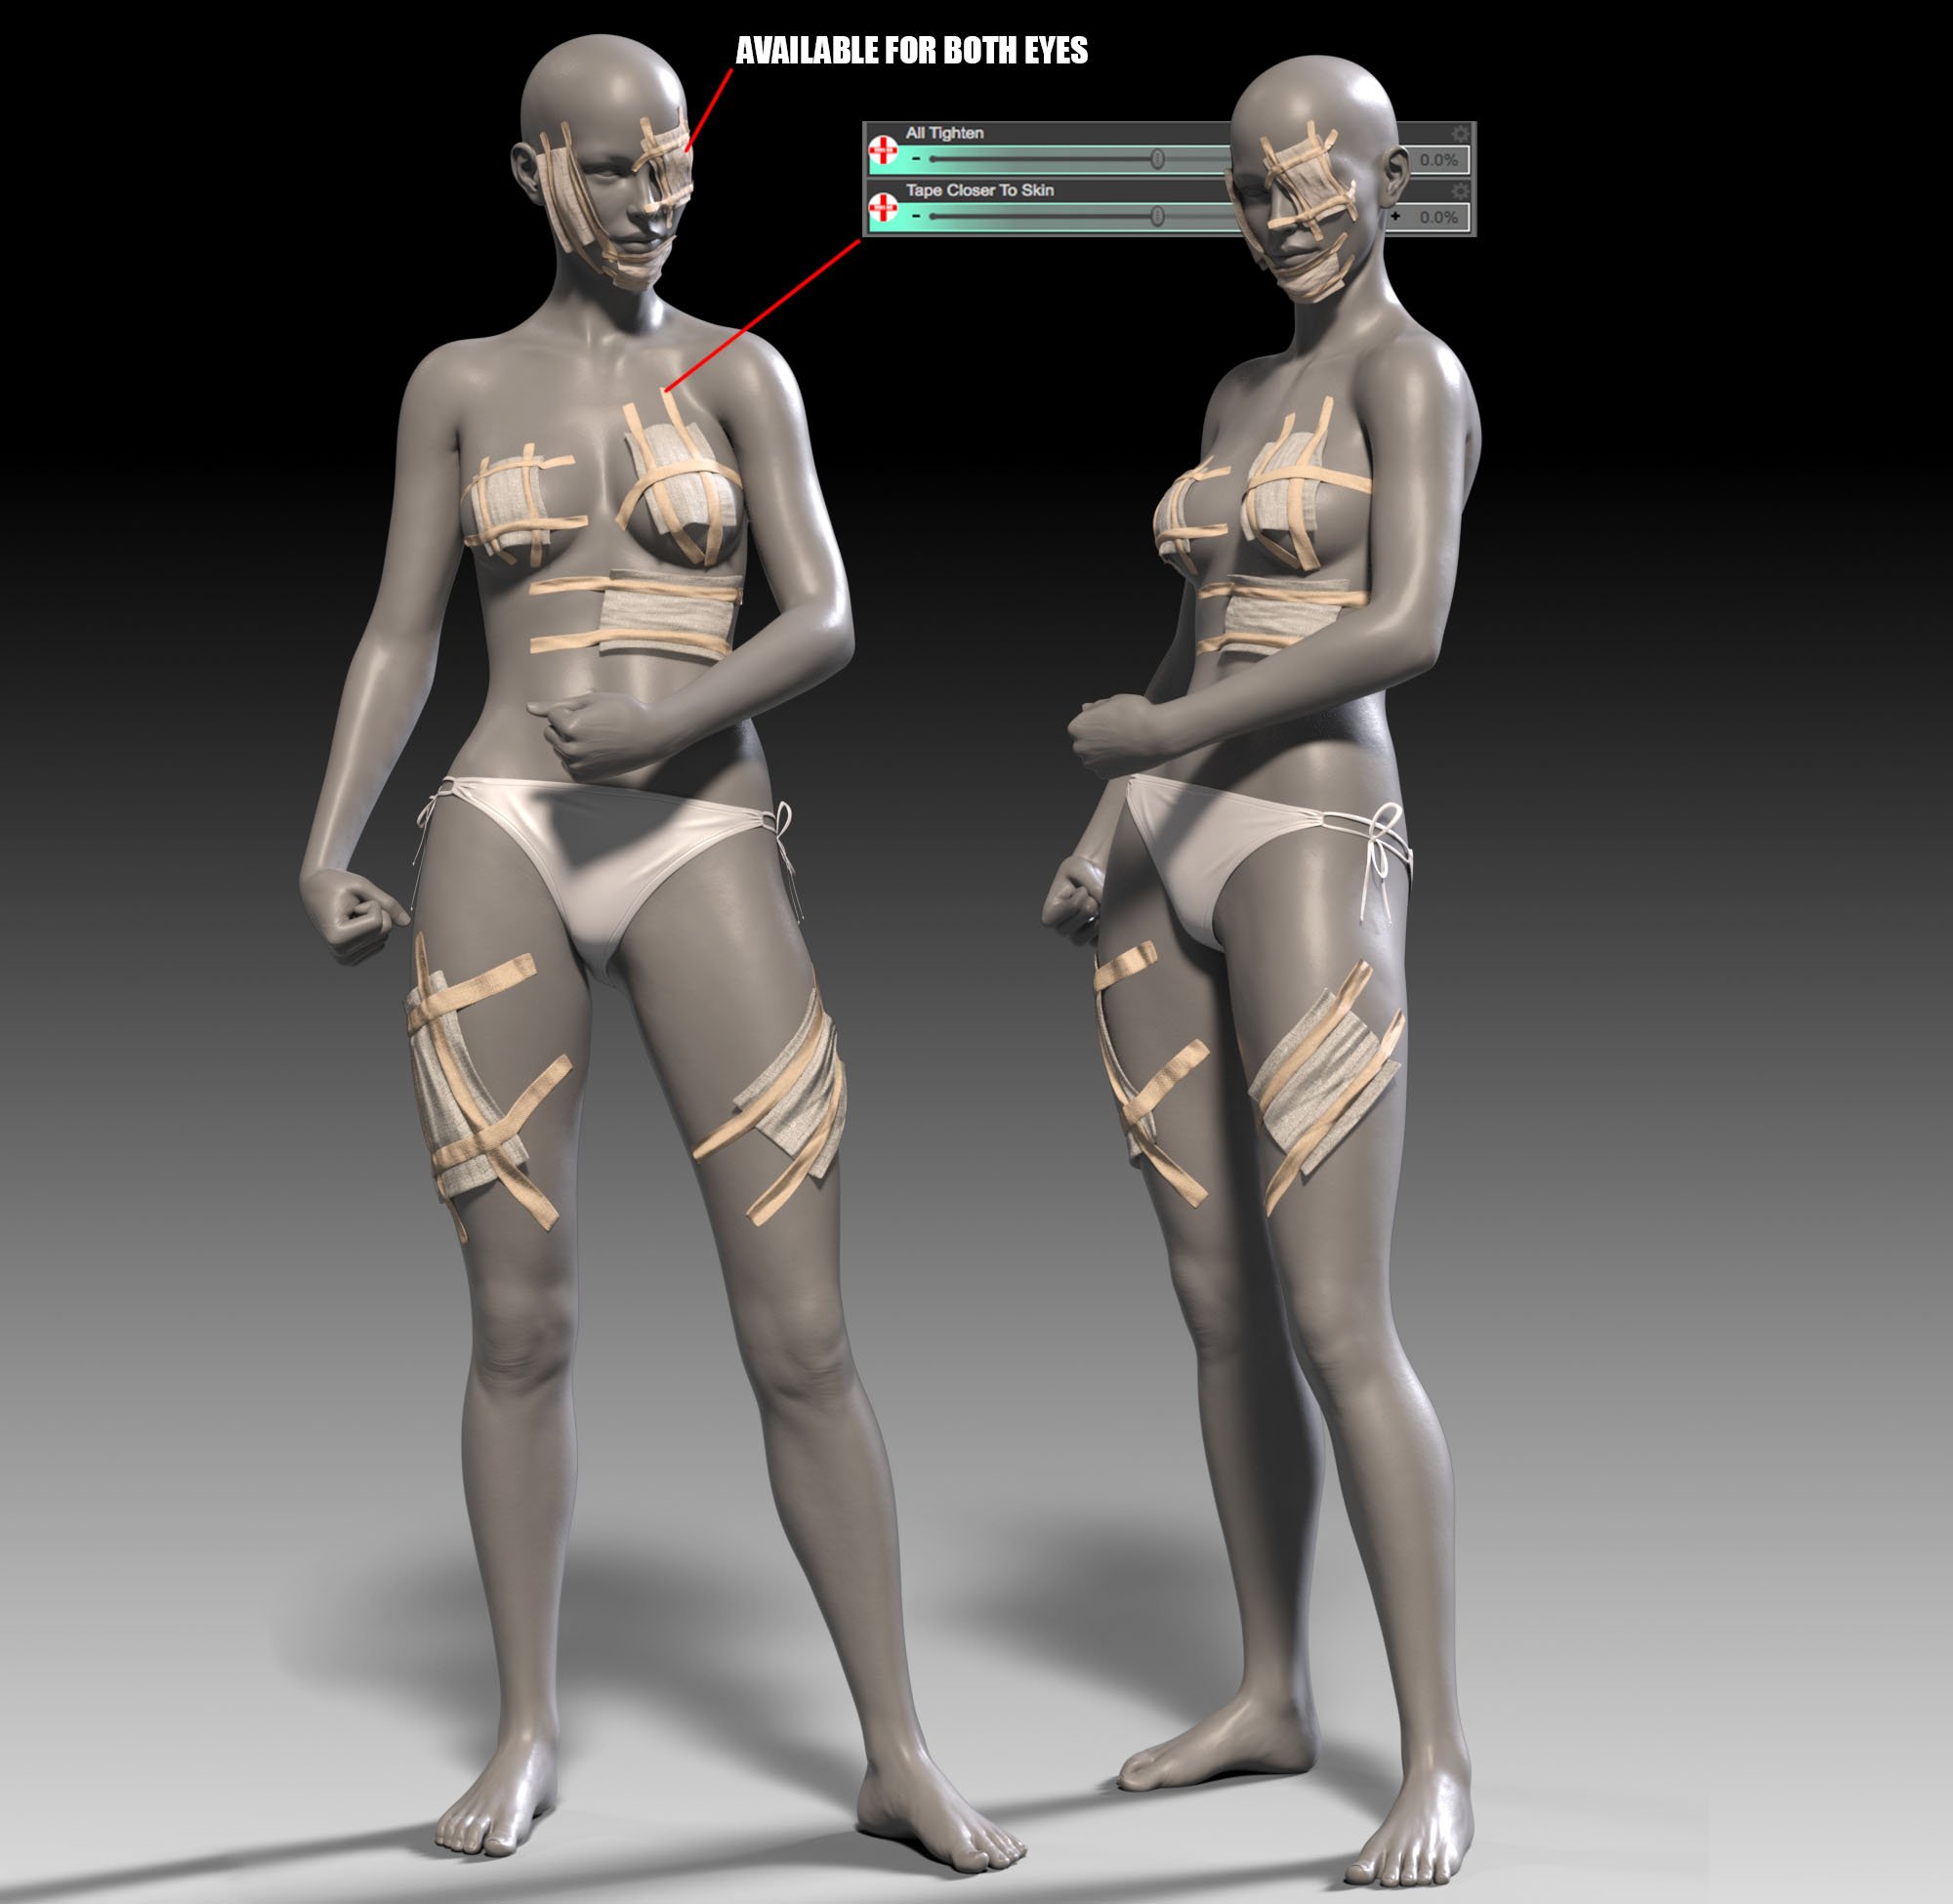 Bandage Kit for Genesis 8 Female(s) by: Linday, 3D Models by Daz 3D